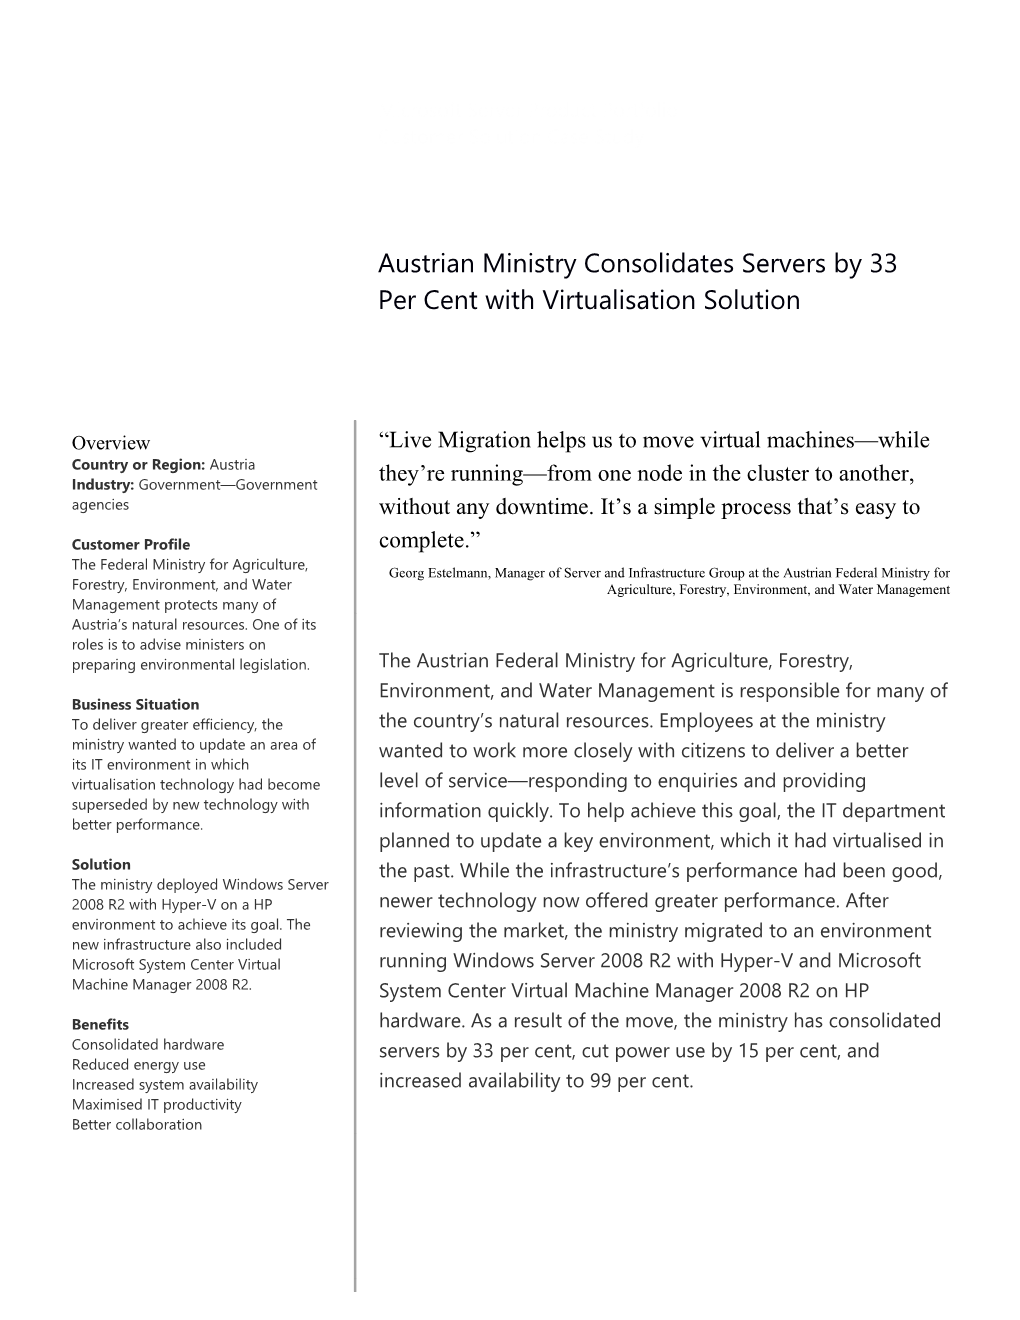 Metia CEP Austrian Ministry Consolidates Servers by 33 Per Cent with Virtualisation Solution